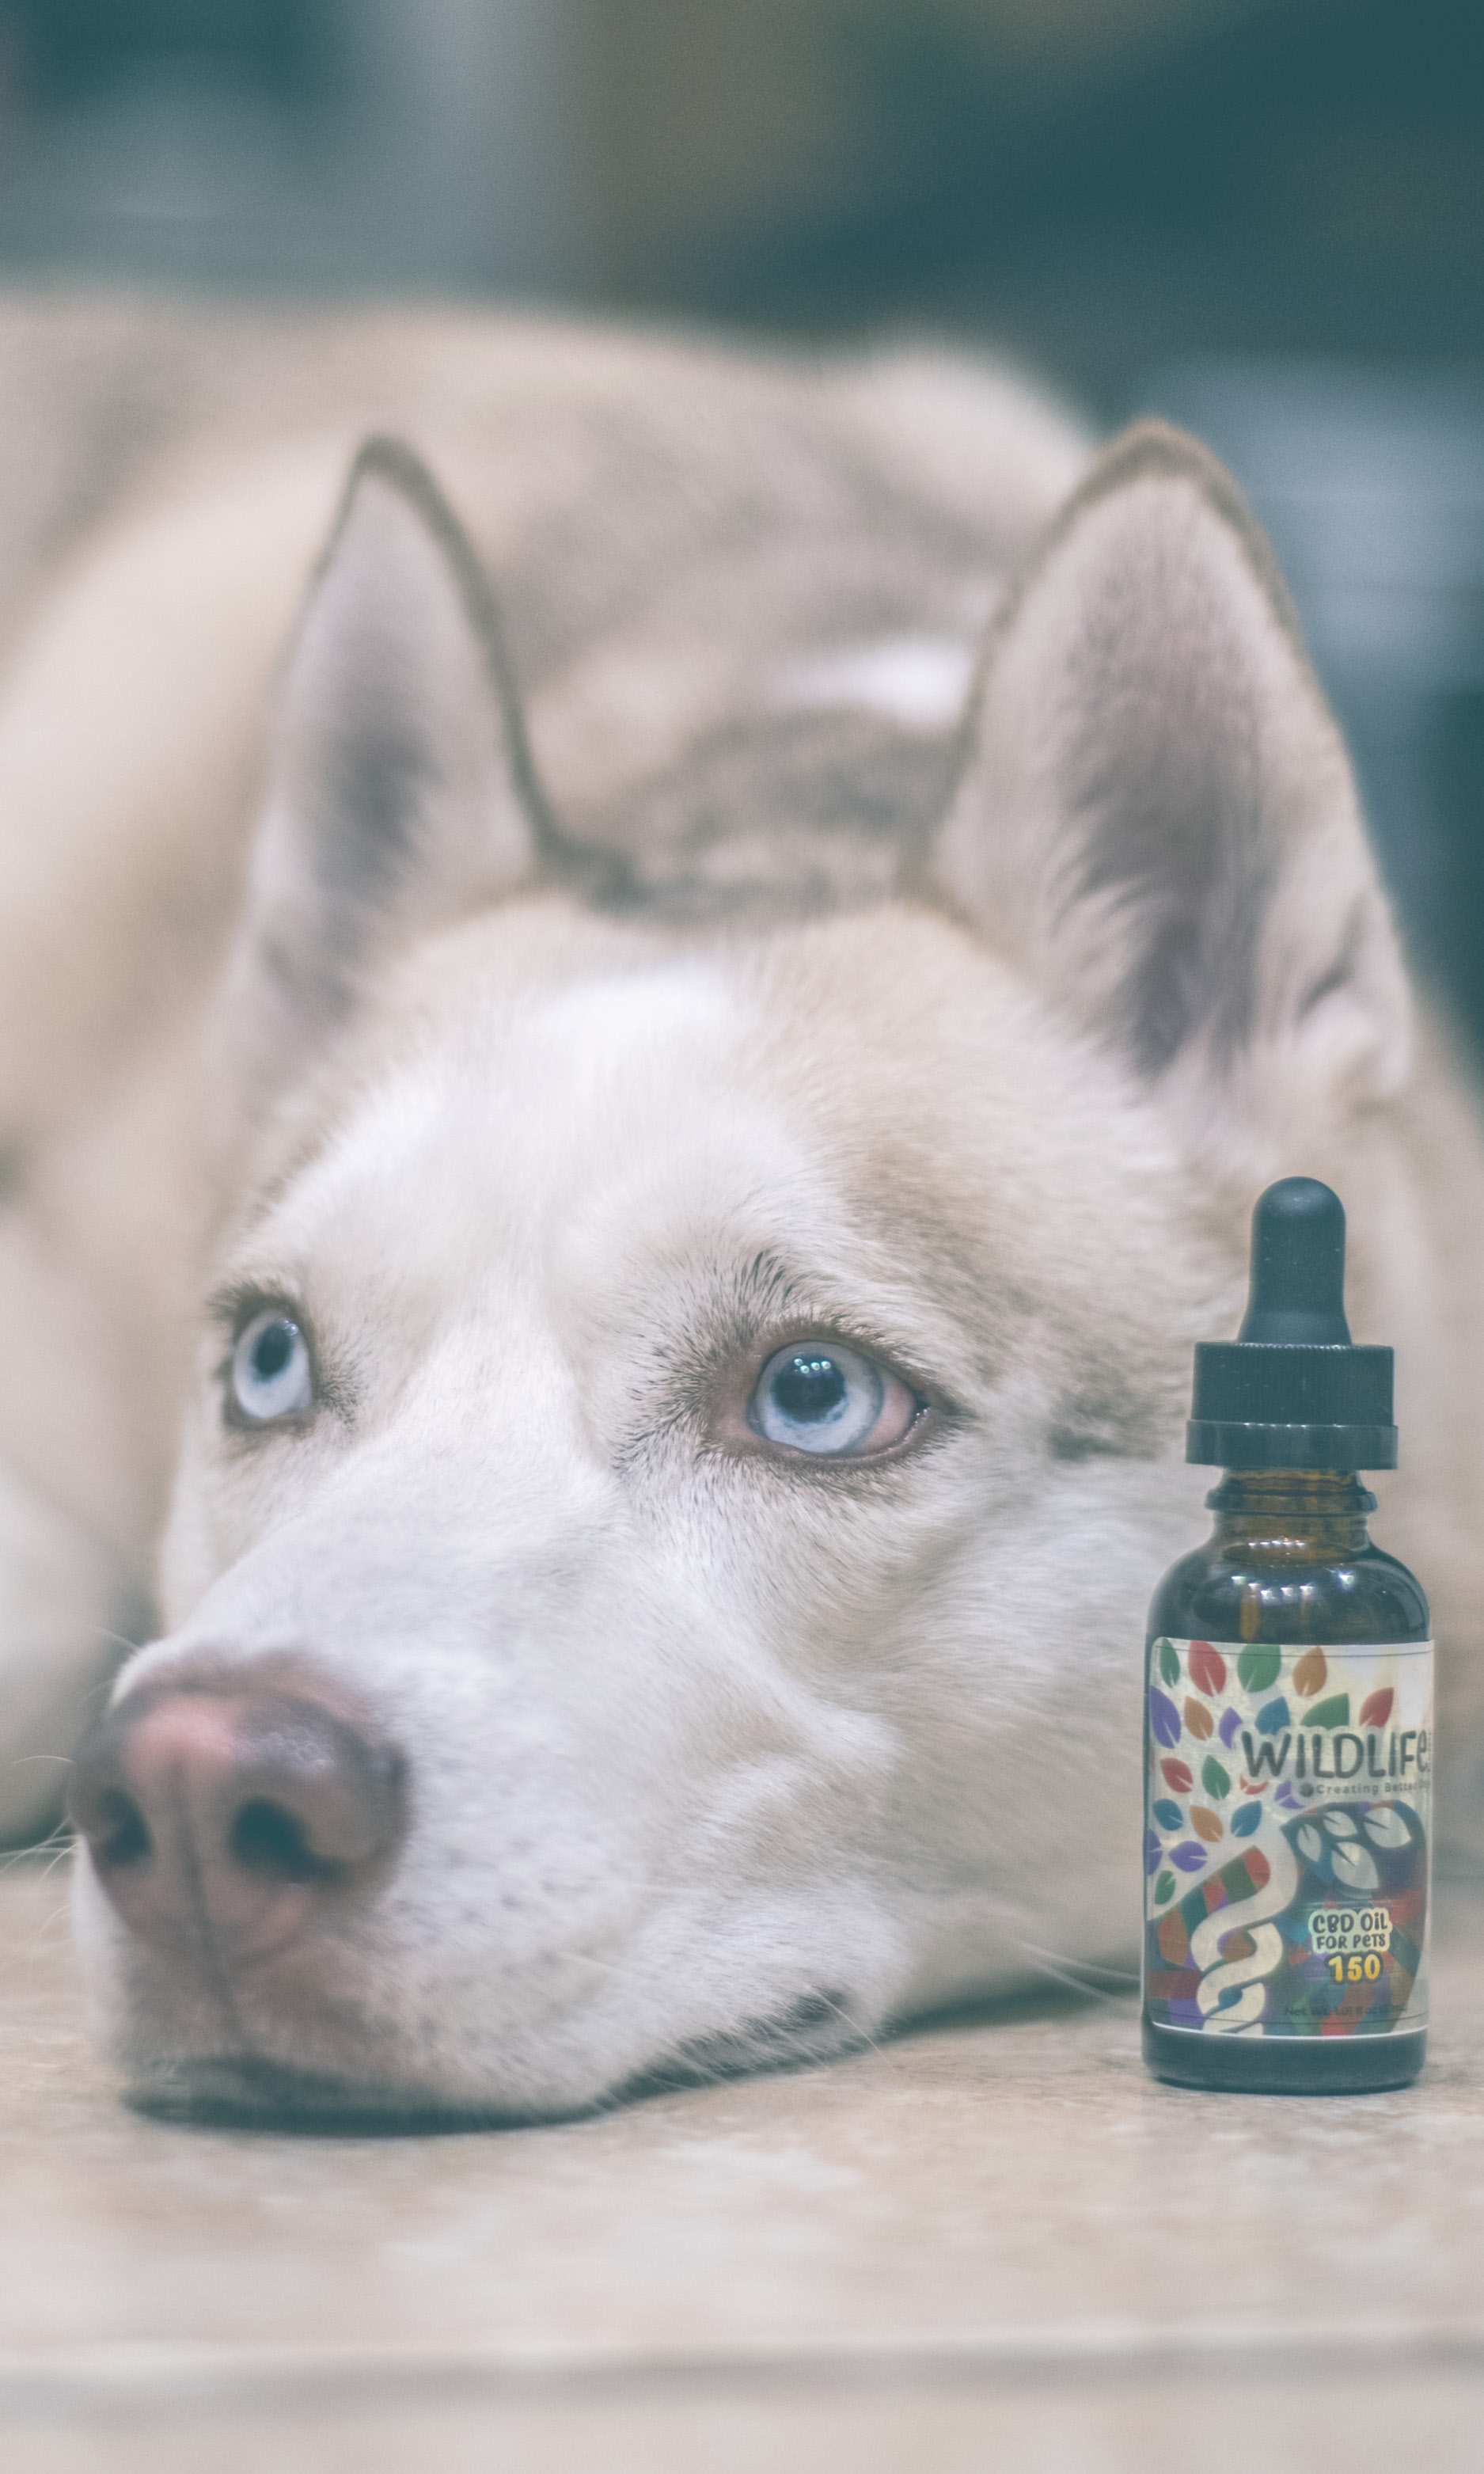 Creating Better Days - CBD Oil Review (Pets) image